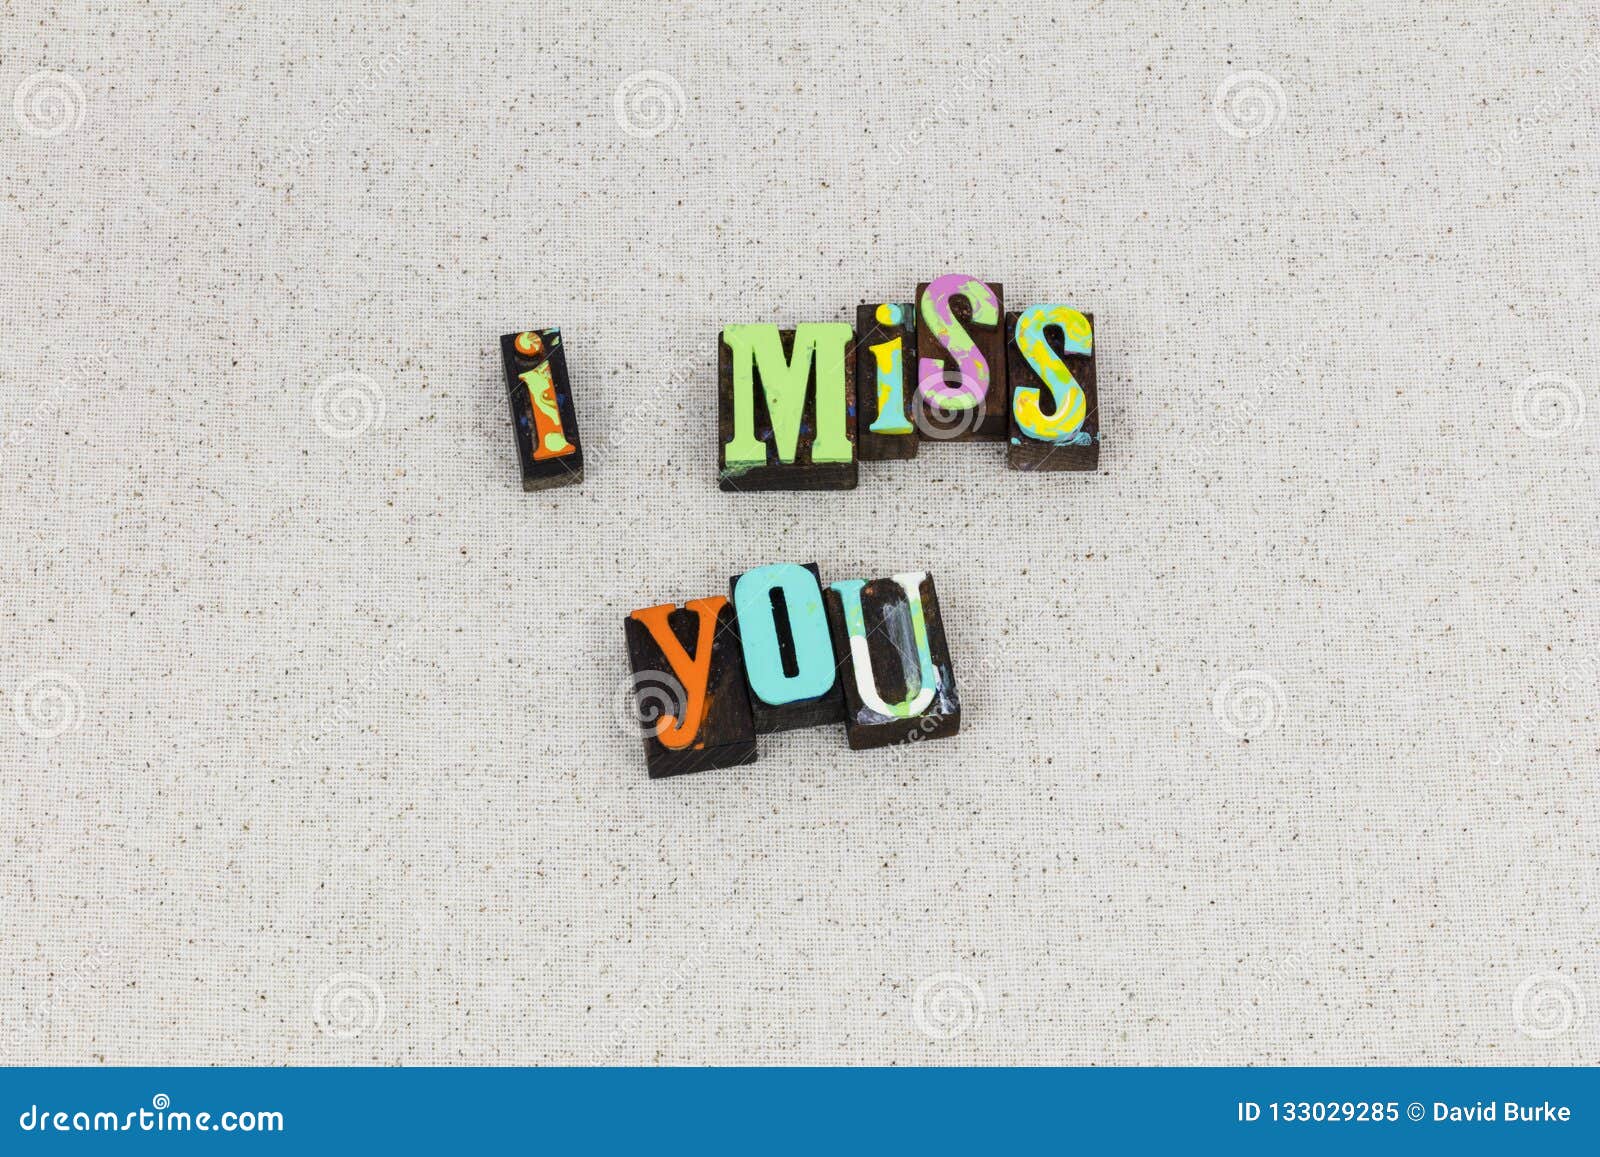 Miss You Love Romance Relationship Stock Image Image Of Letters Print